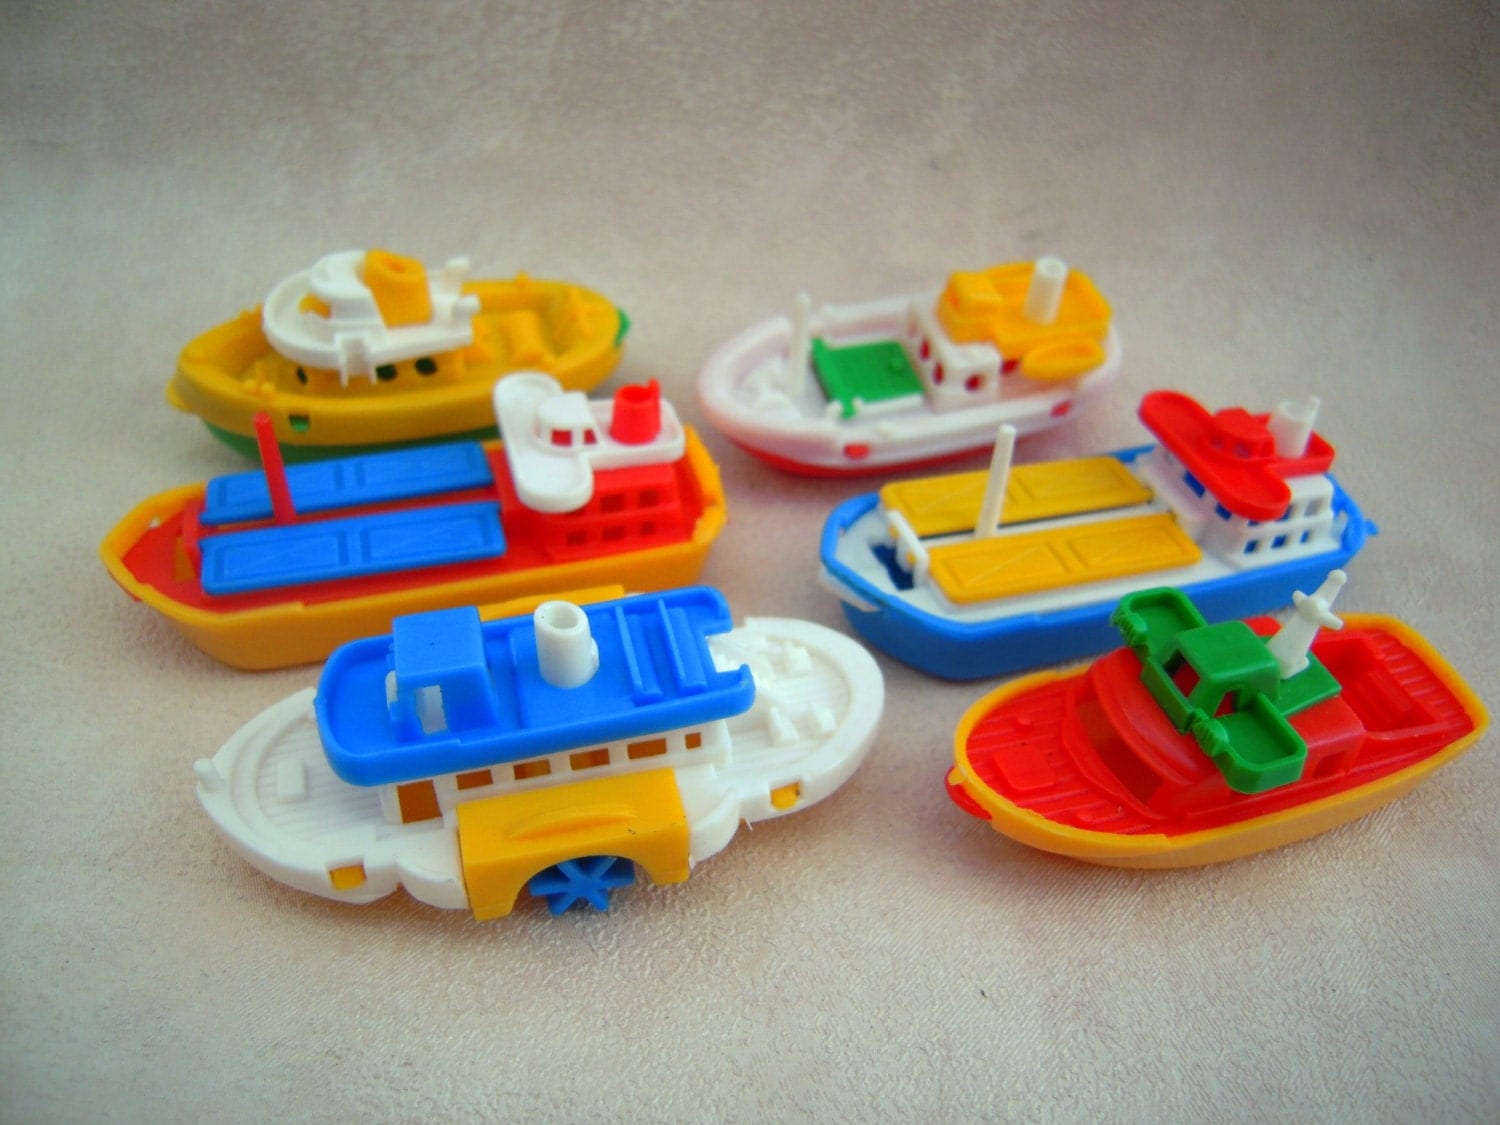 Vintage Plastic Toy Boat Set Made in W. Germany